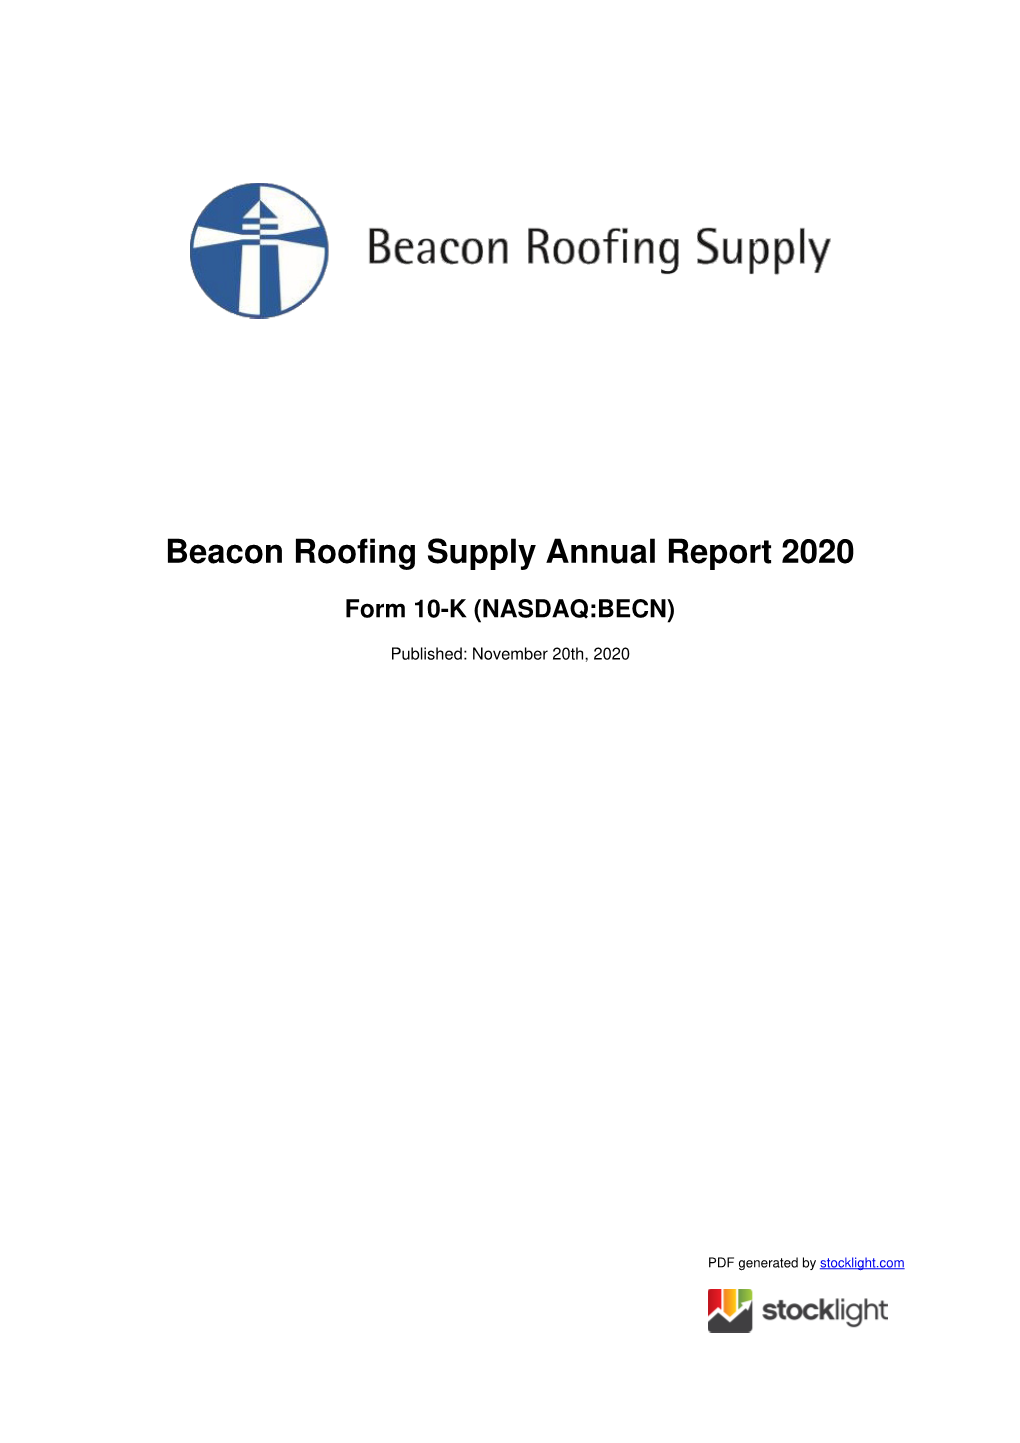 Beacon Roofing Supply Annual Report 2020